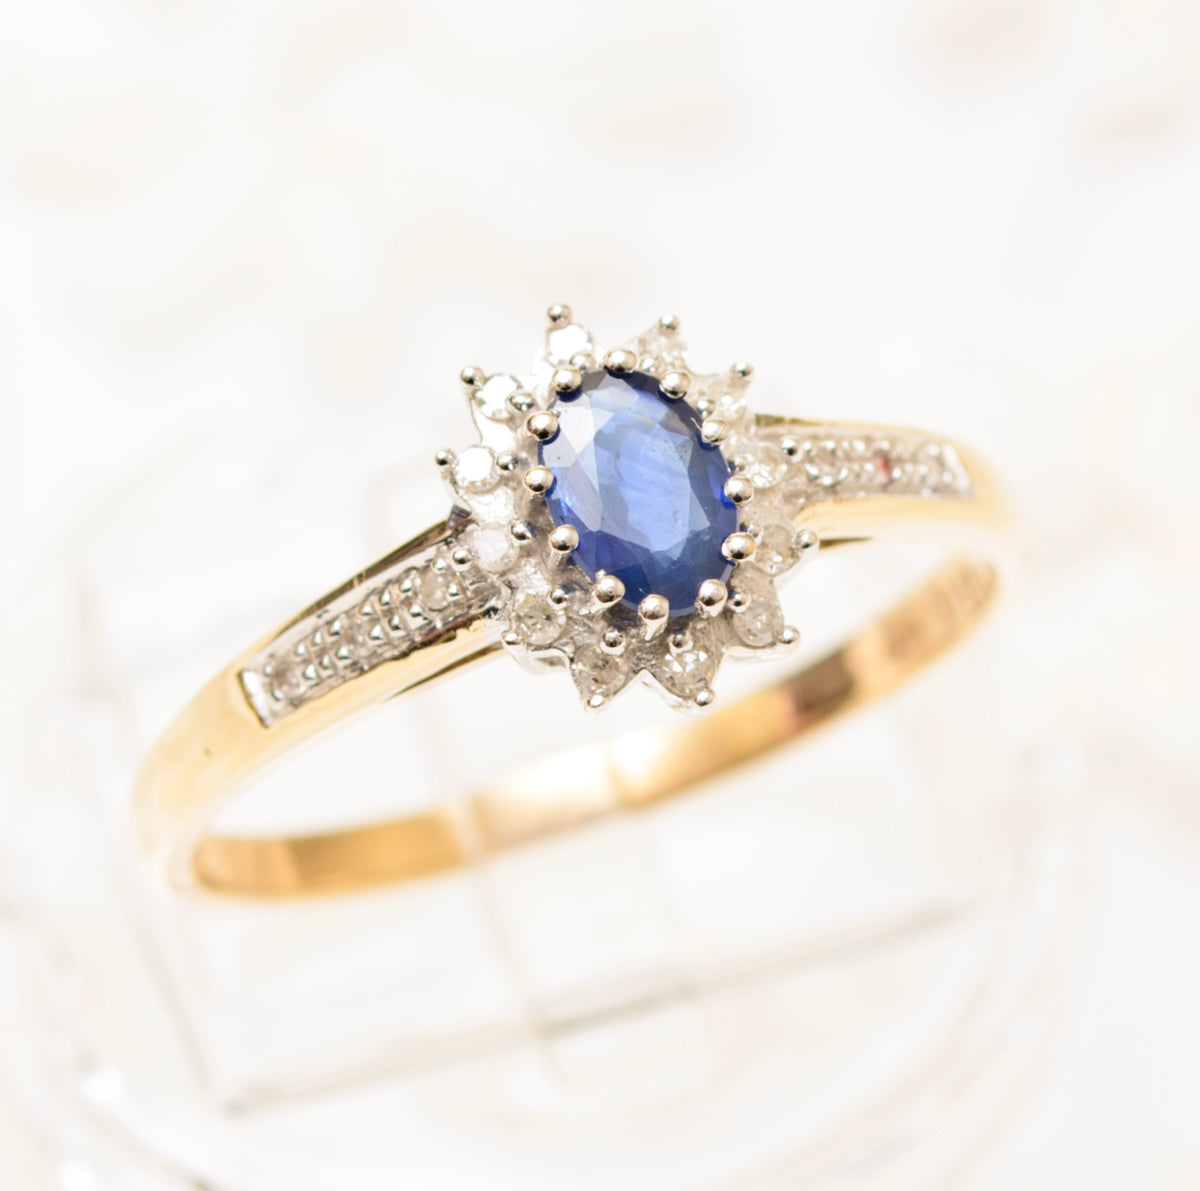 Vintage Natural Sapphire & Diamond Ring In 9ct Gold Halo Design UK Size S1/2 (A1832)